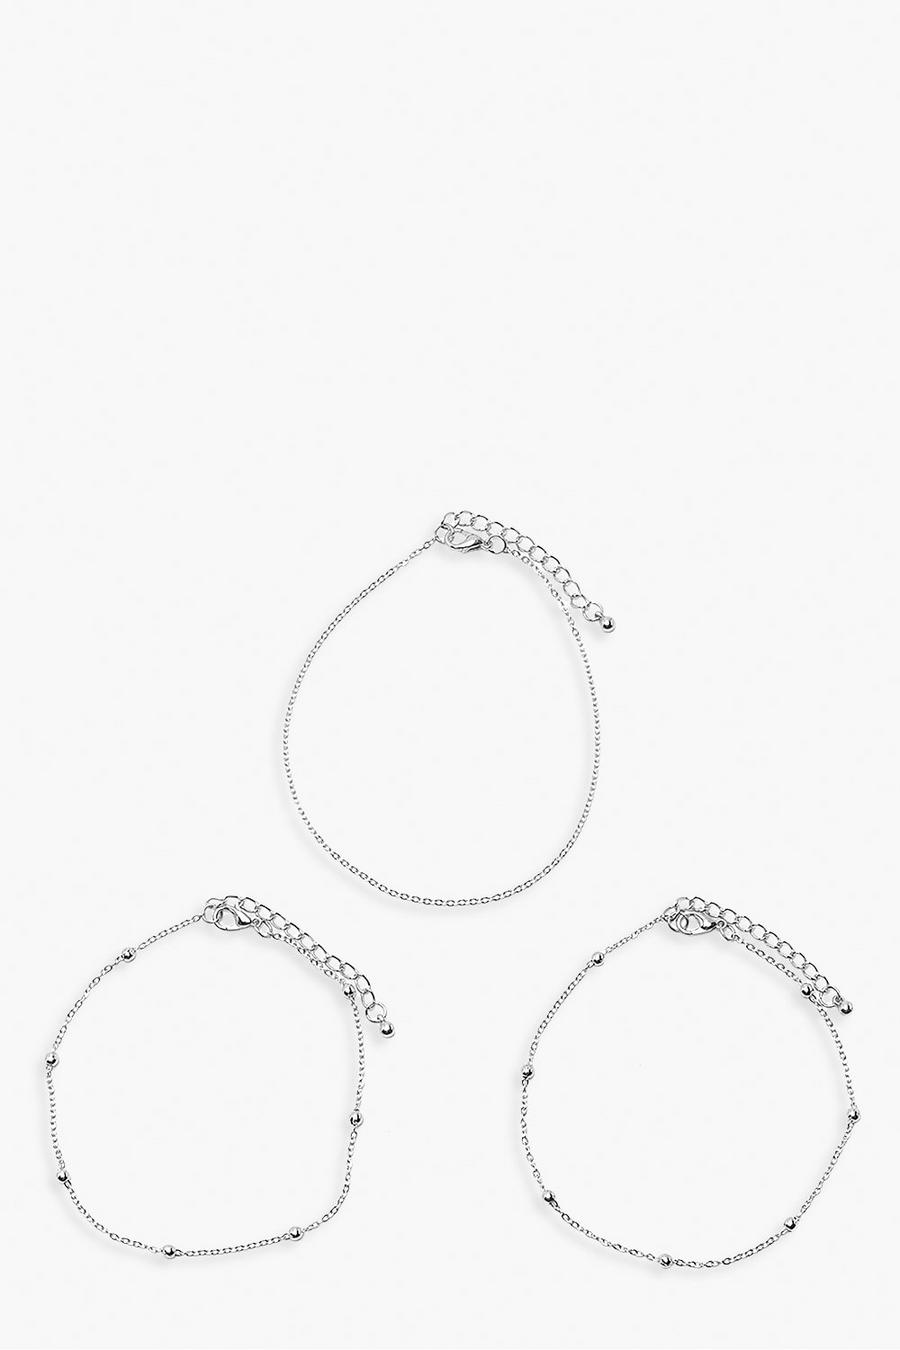 Silver Plus 3 Chain Anklet Pack